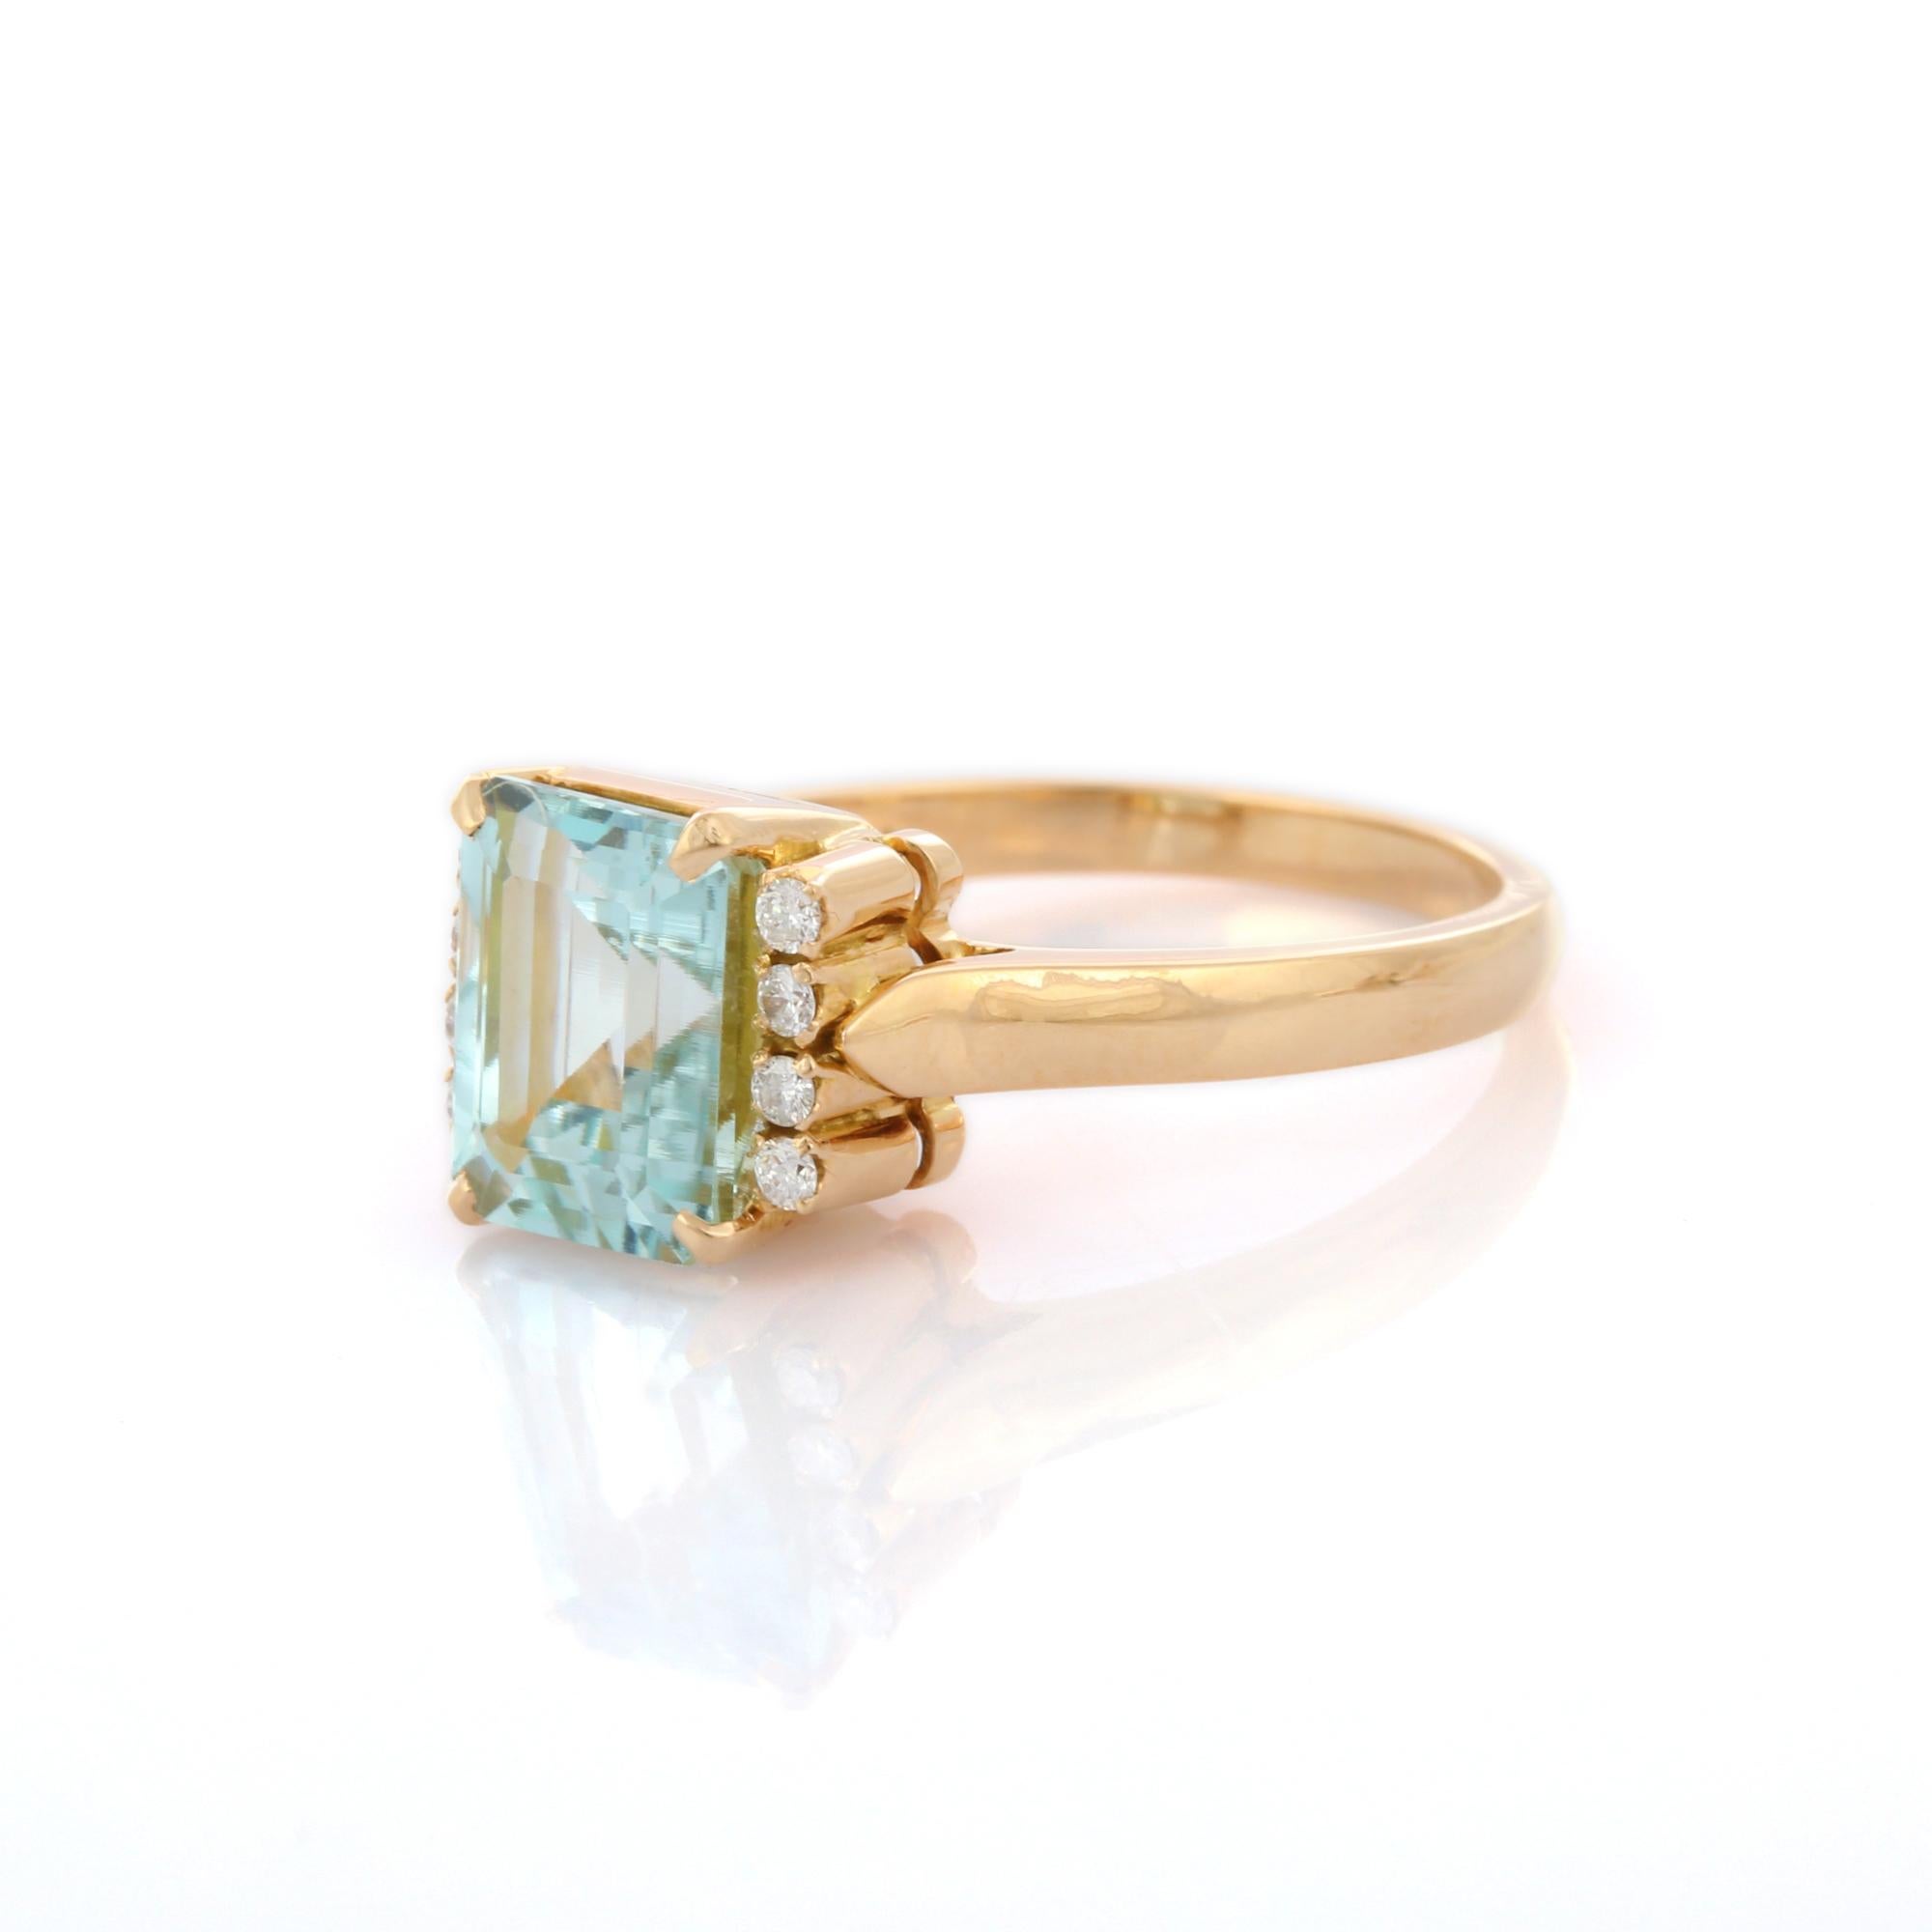 For Sale:  Octagon Cut 2.65 ct Aquamarine Cocktail Ring in 18K Yellow Gold with Diamonds  4